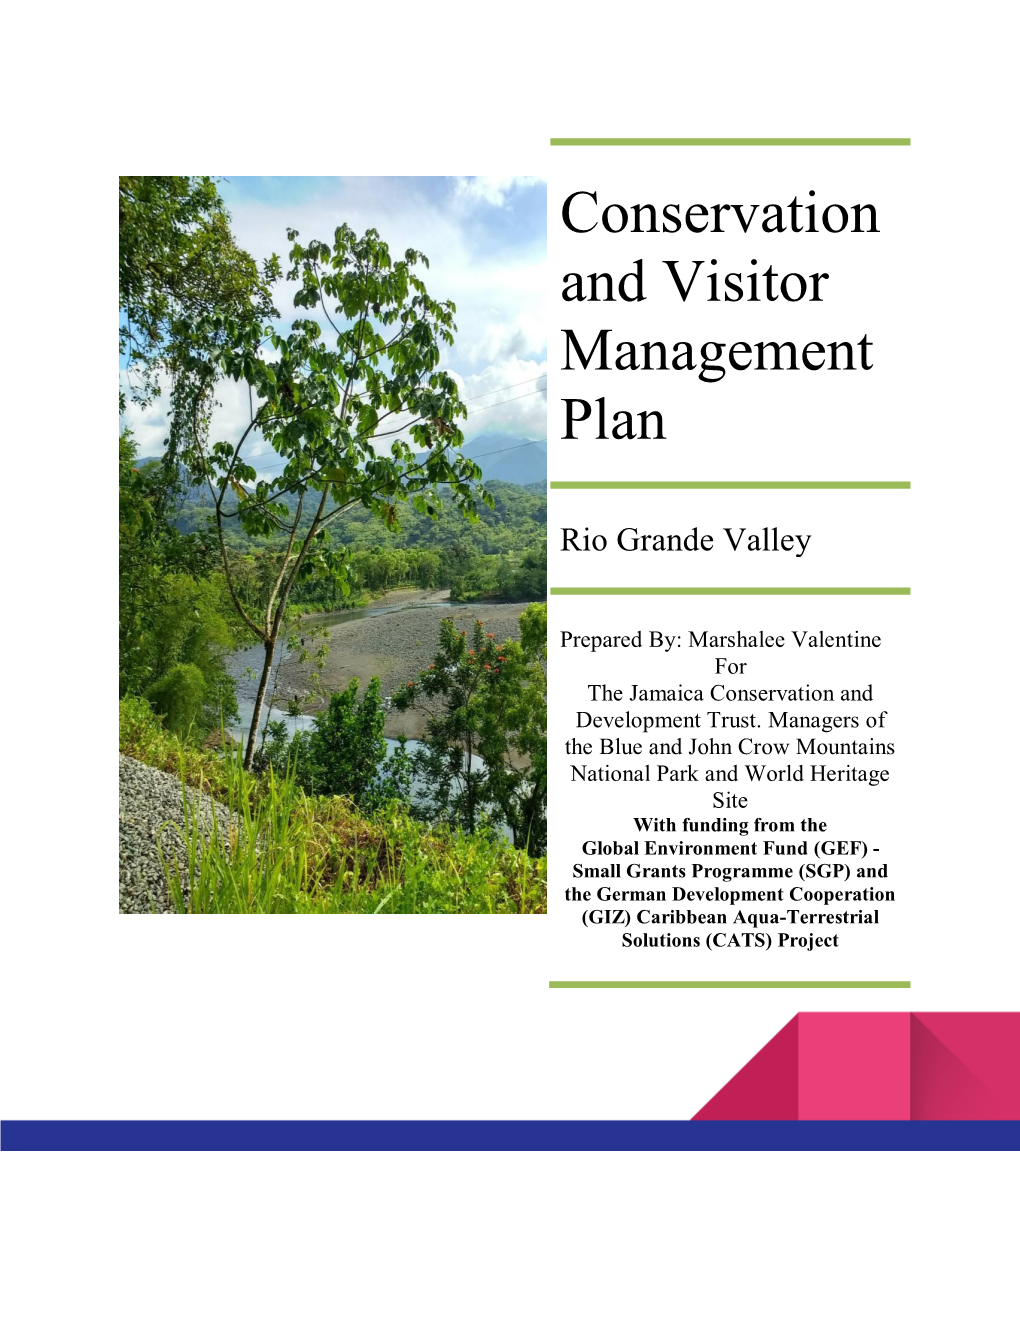 Conservation and Visitor Management Plan